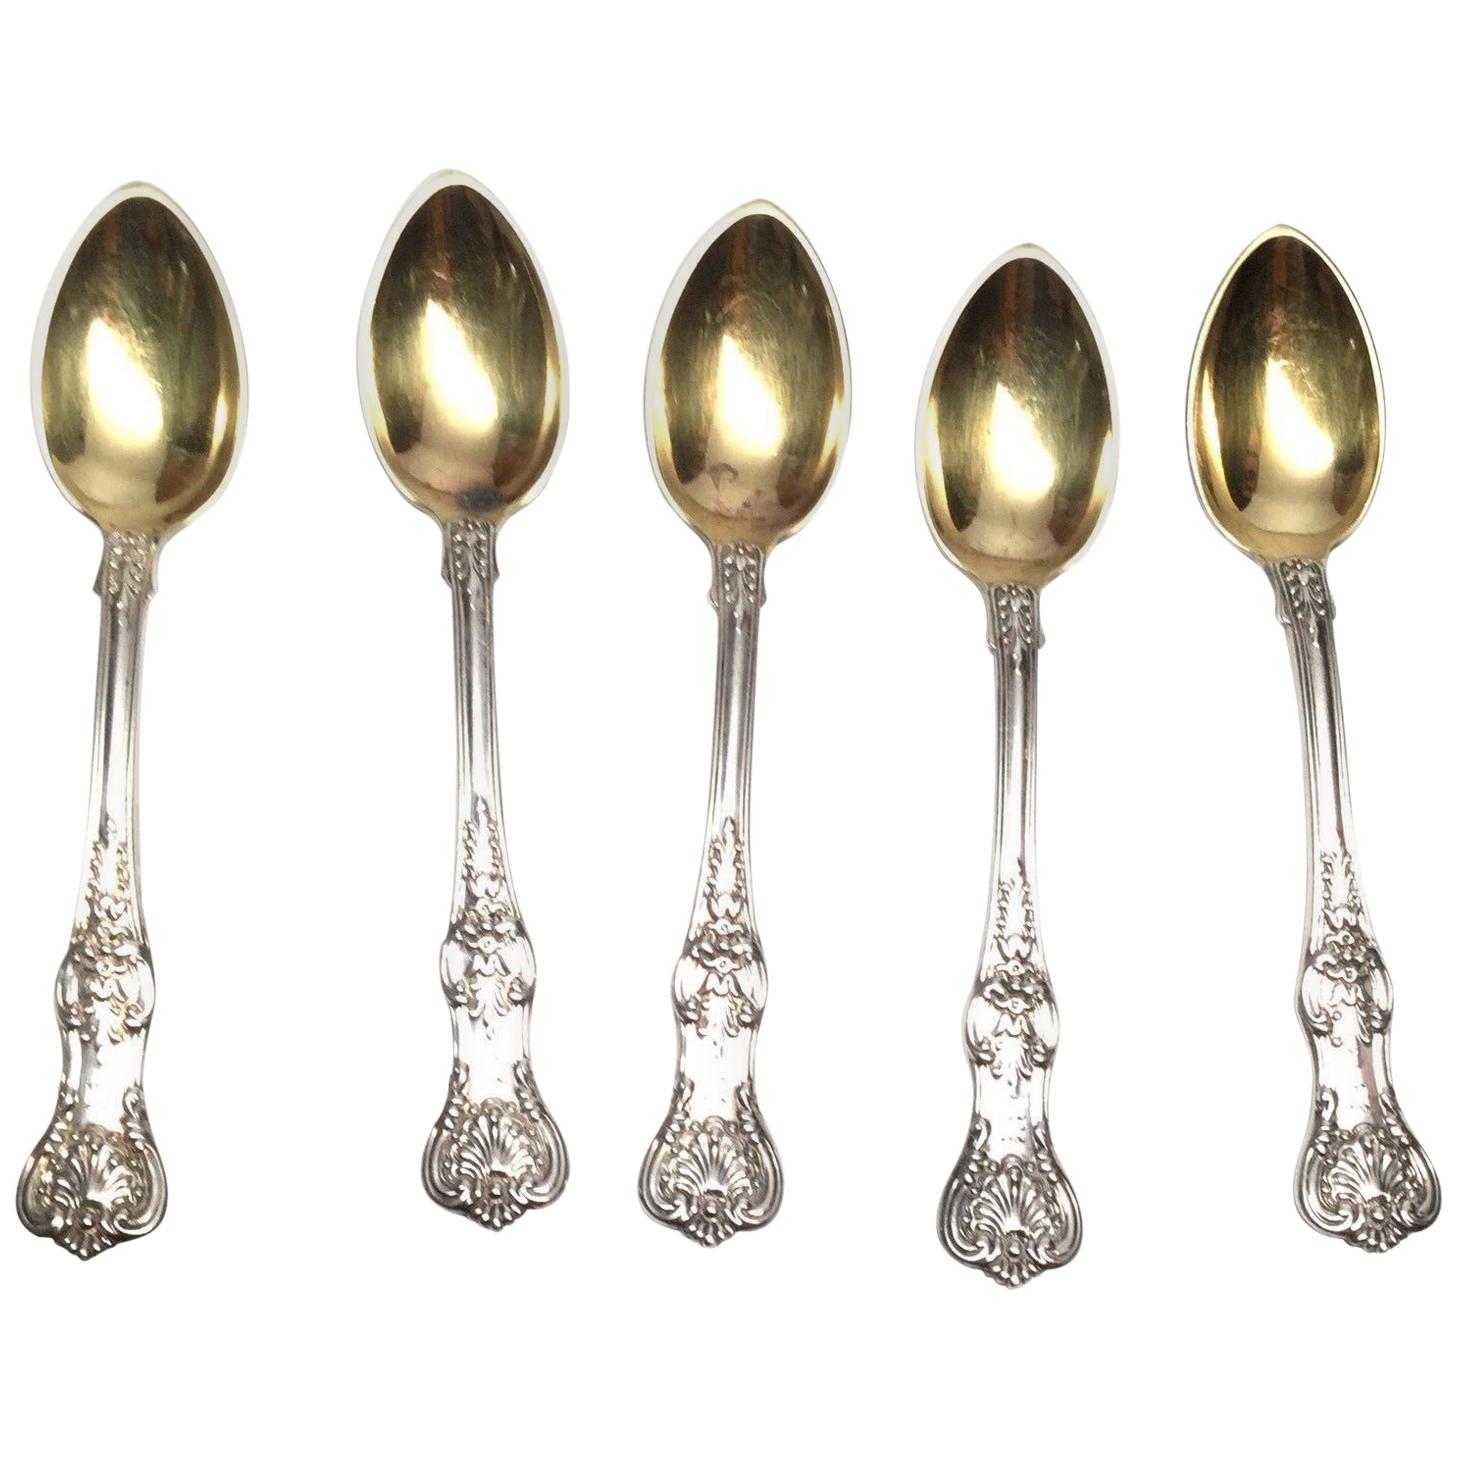 Tiffany & Co English King Pattern 1885 Sterling Silver Set of 5 Demitasse Spoons